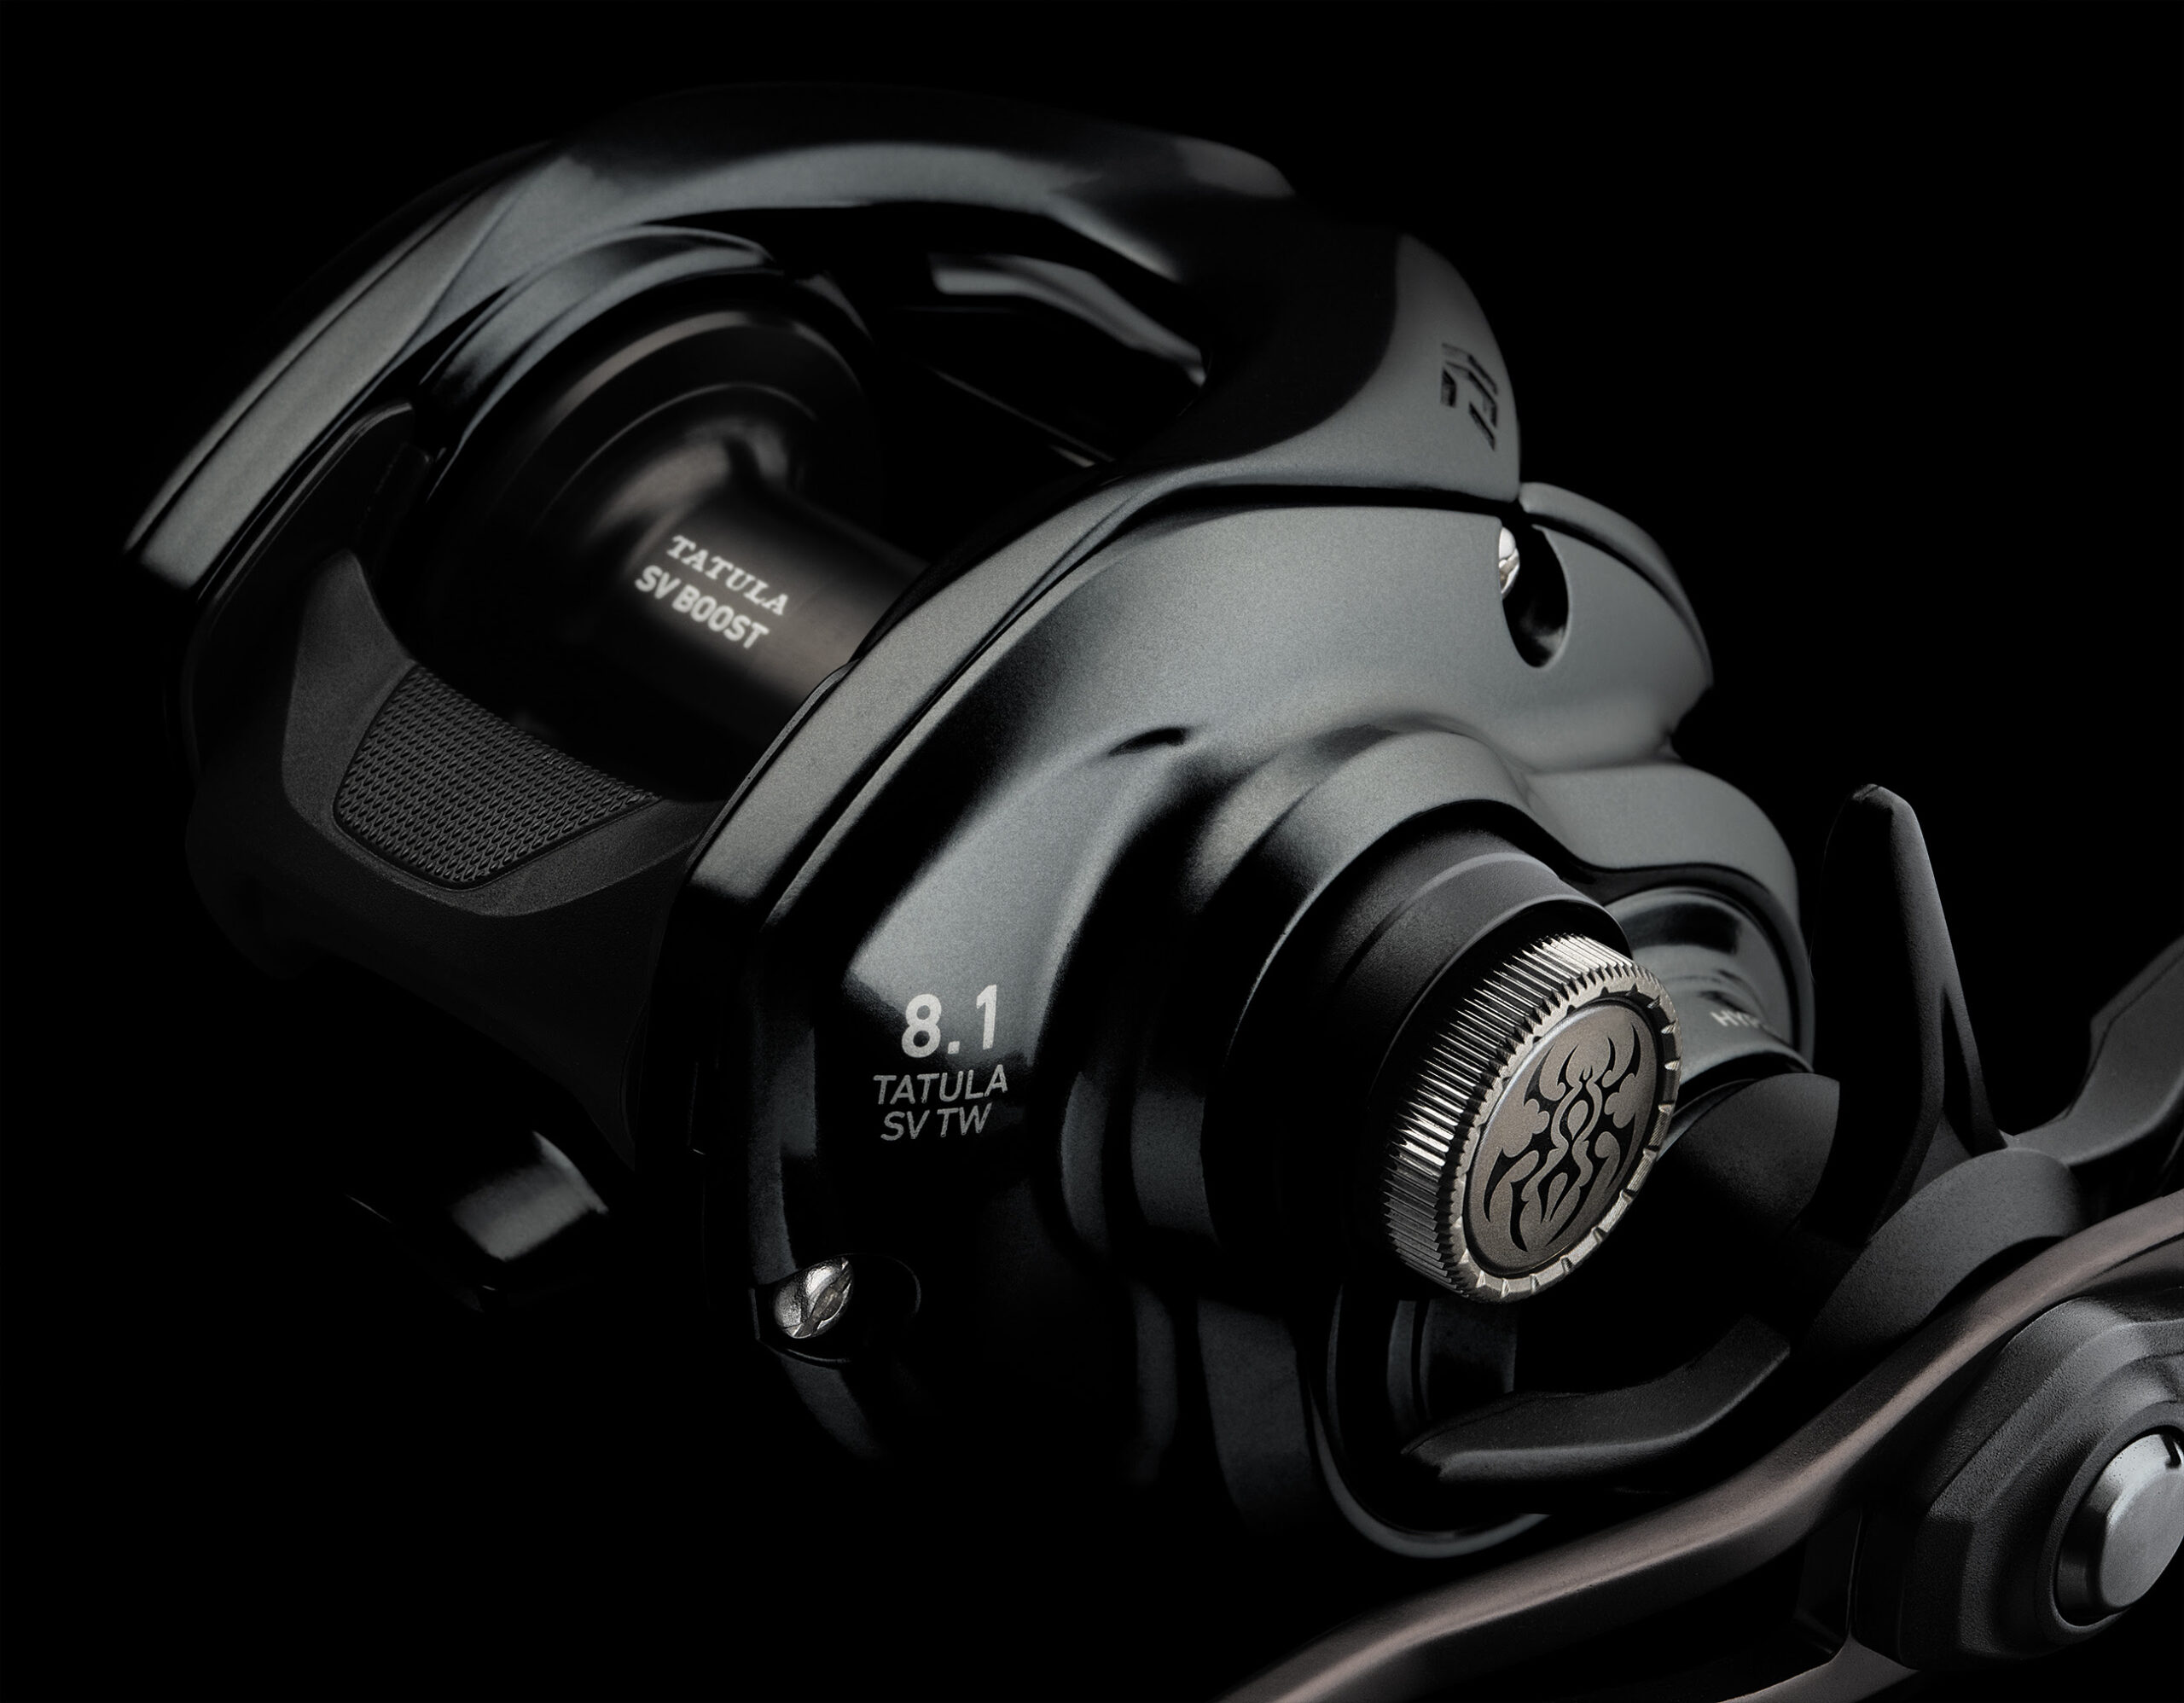 DAIWA Showing New Products Live at ICAST Presentation